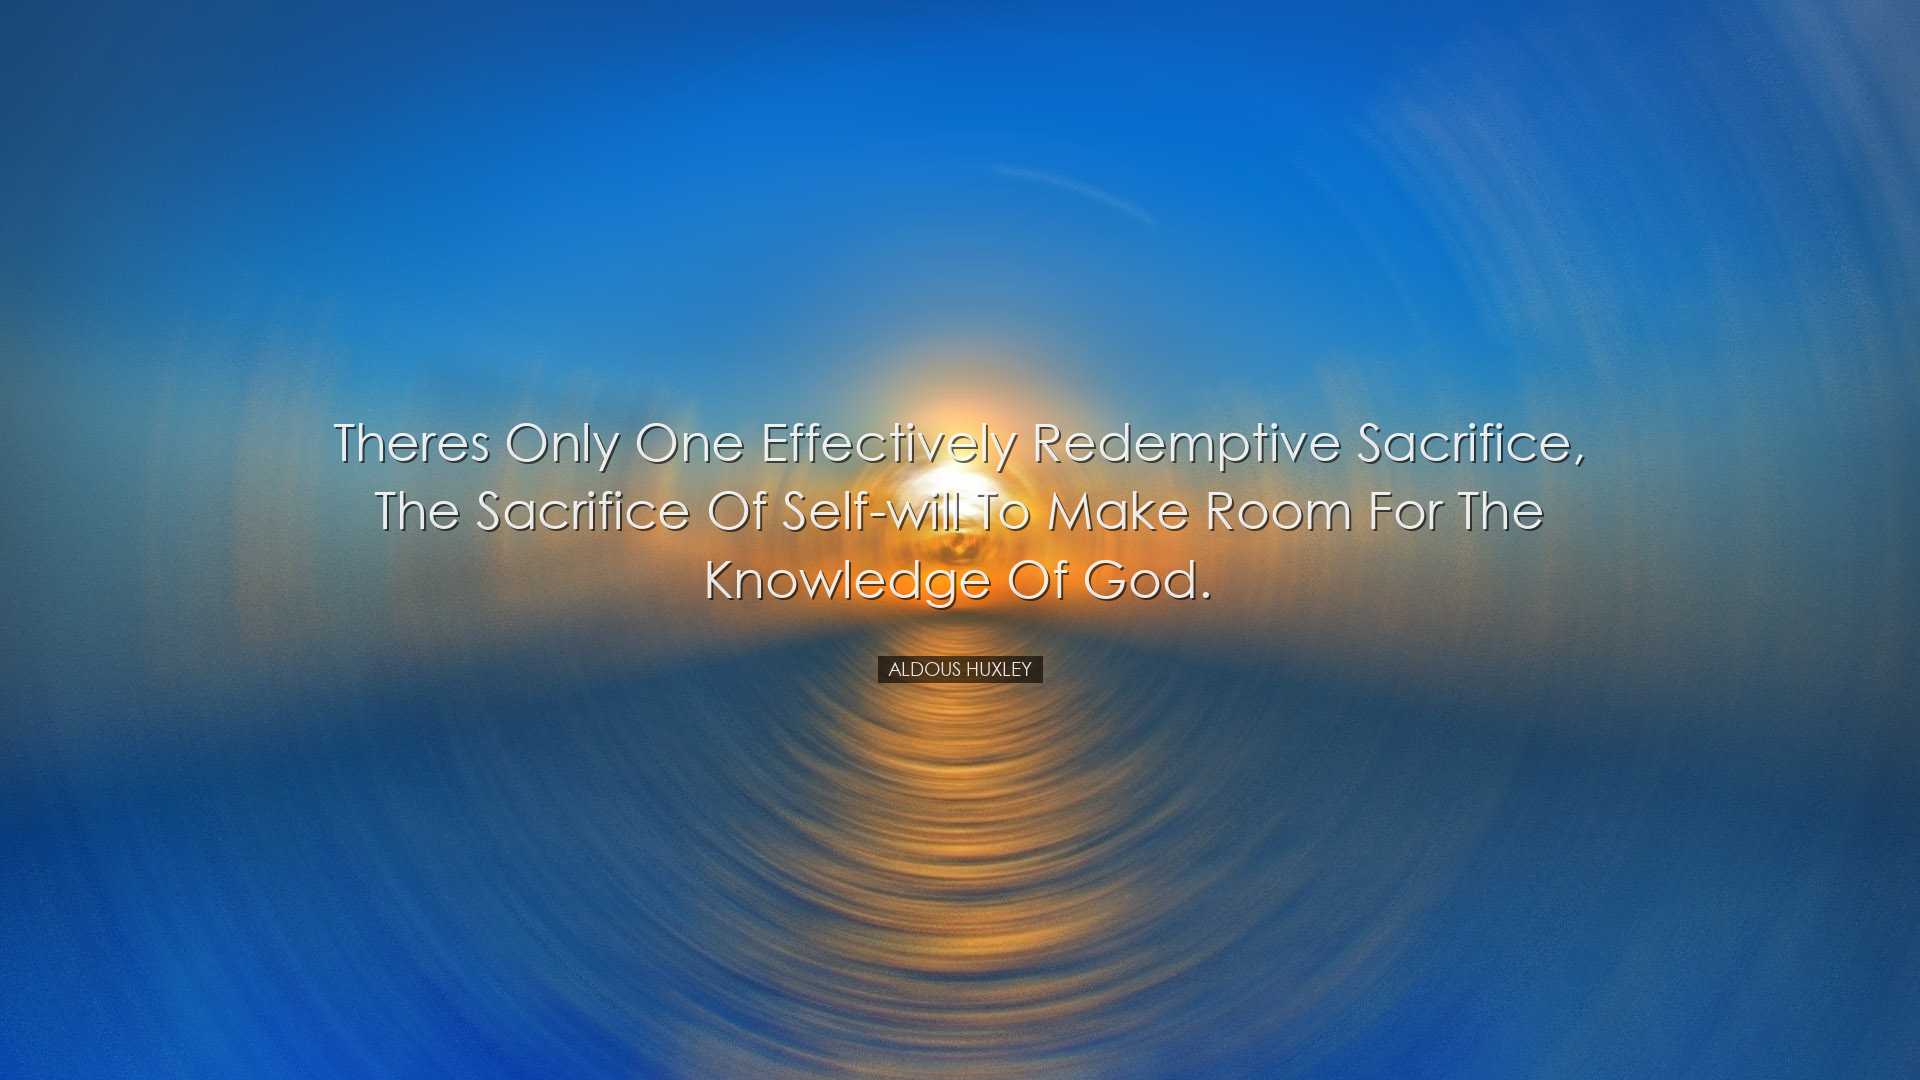 Theres only one effectively redemptive sacrifice, the sacrifice of